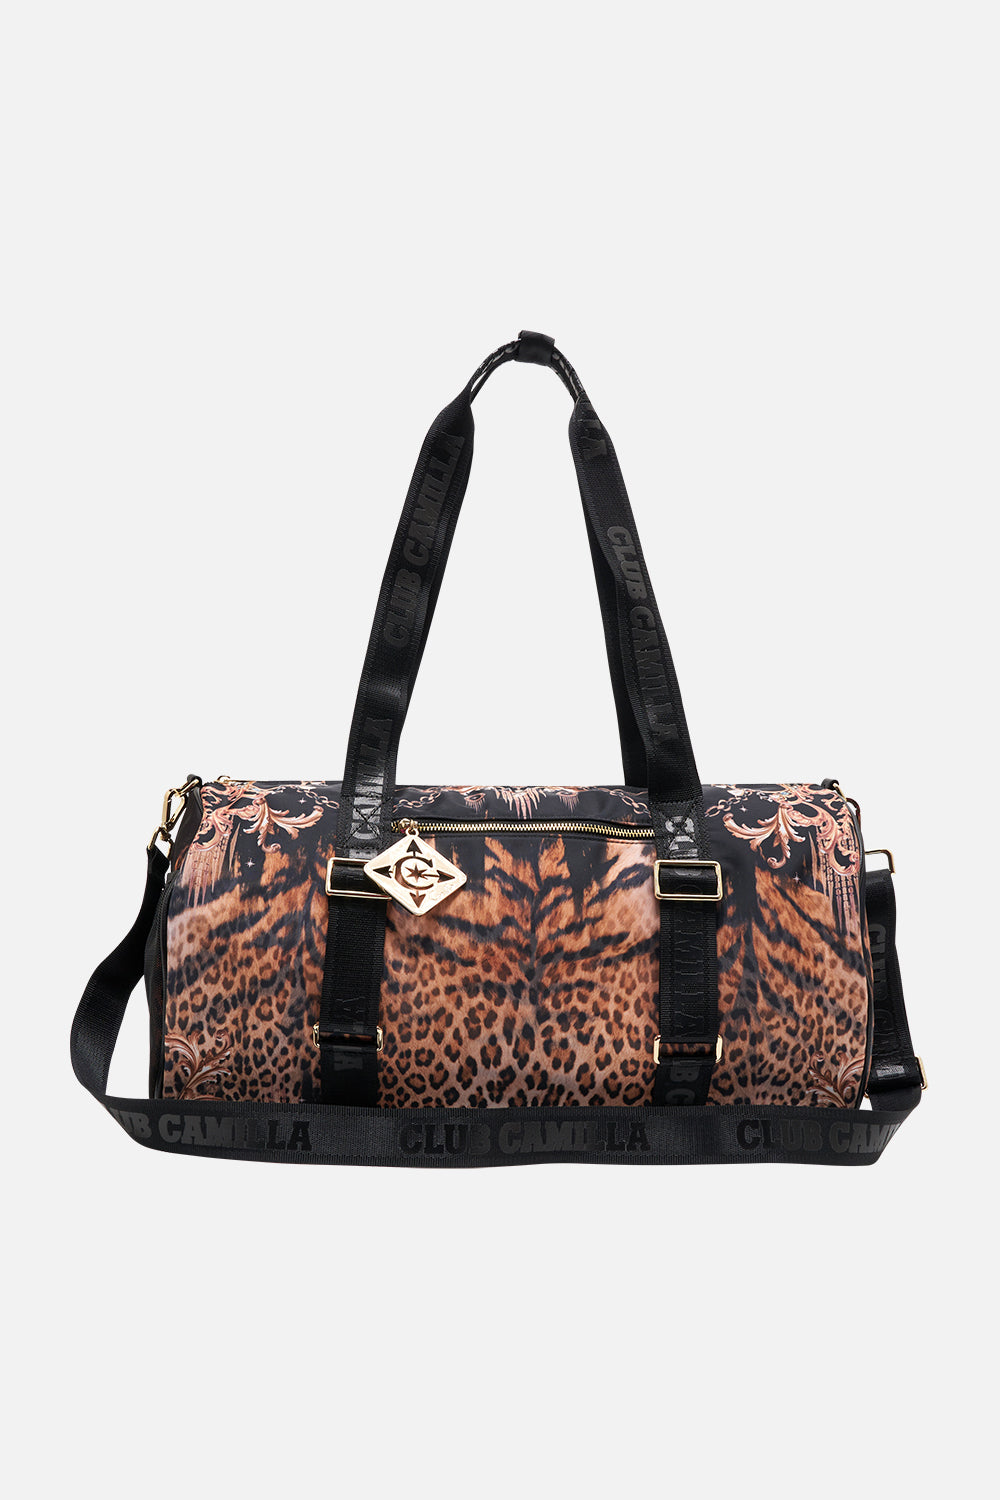 Product view of CAMILLA leopard print gym bag in Running in The Wild print